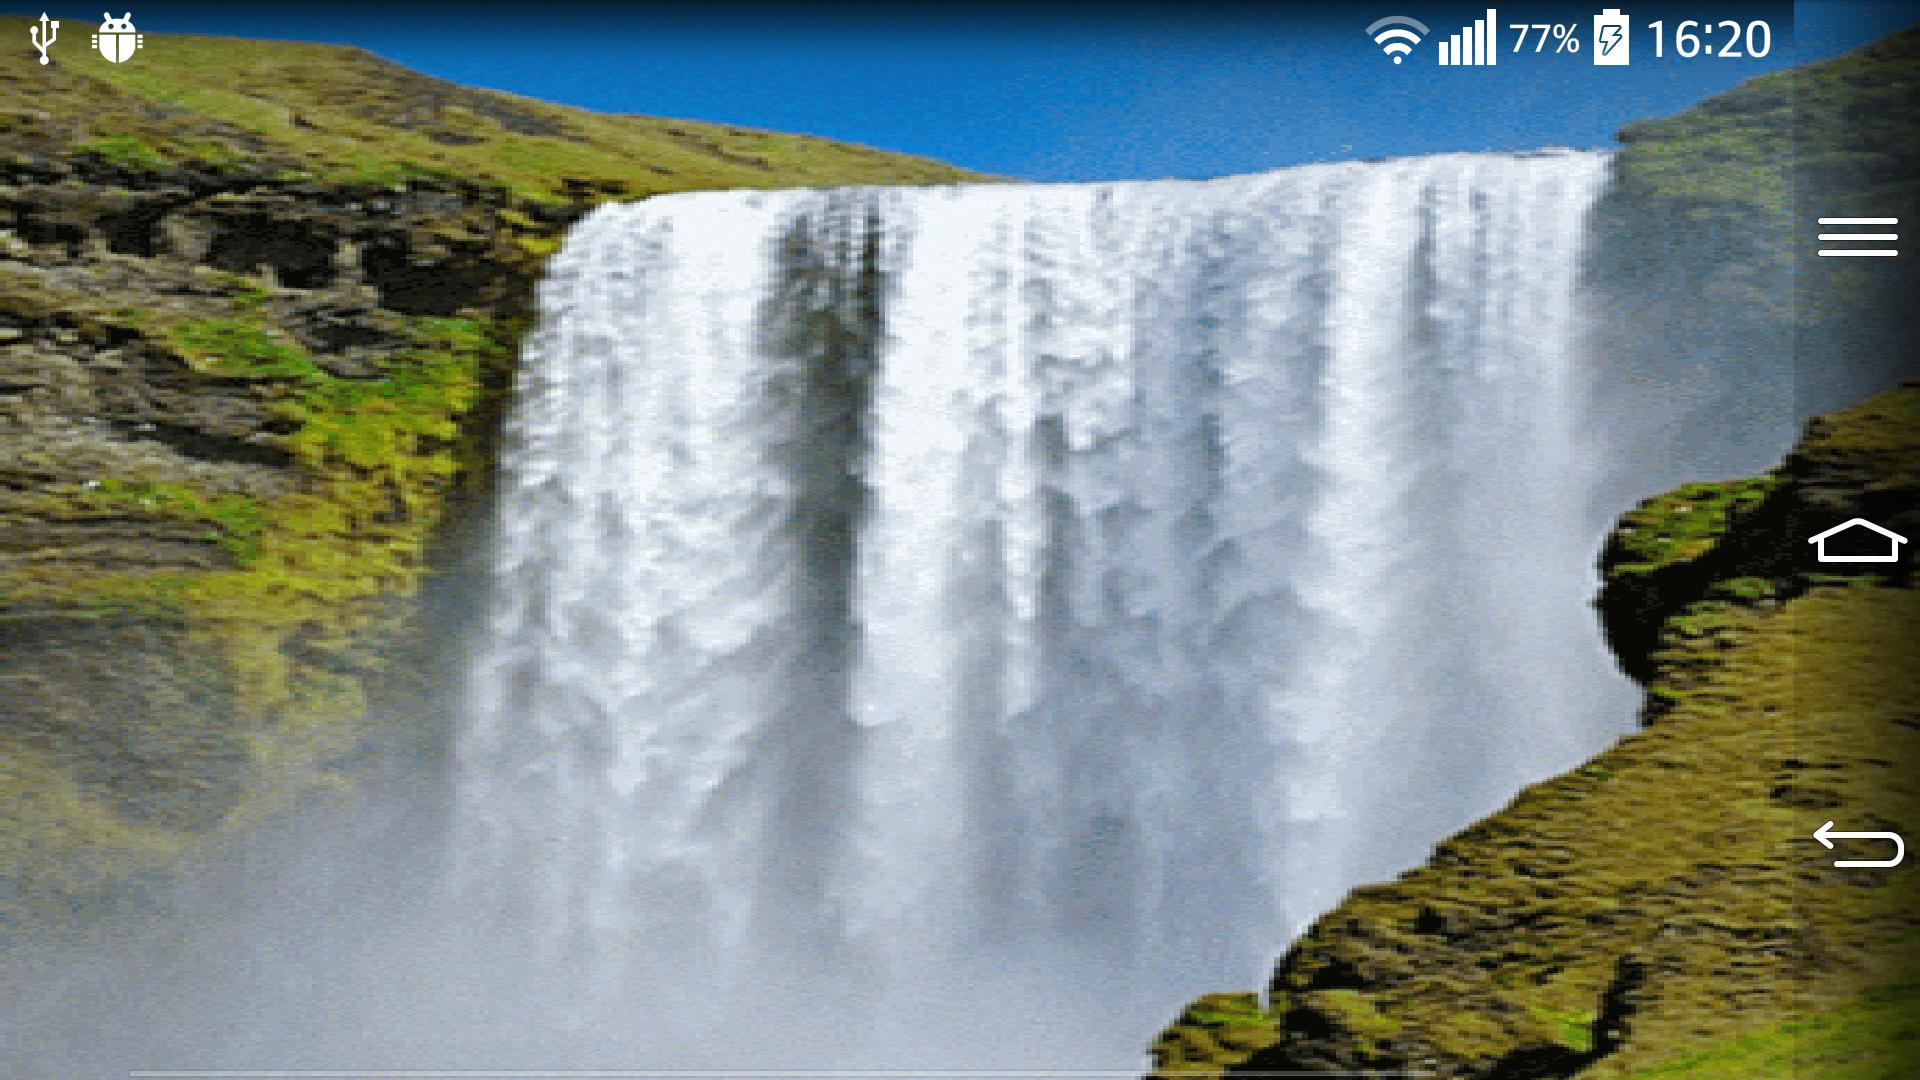 Waterfall Live Wallpaper for Android - APK Download